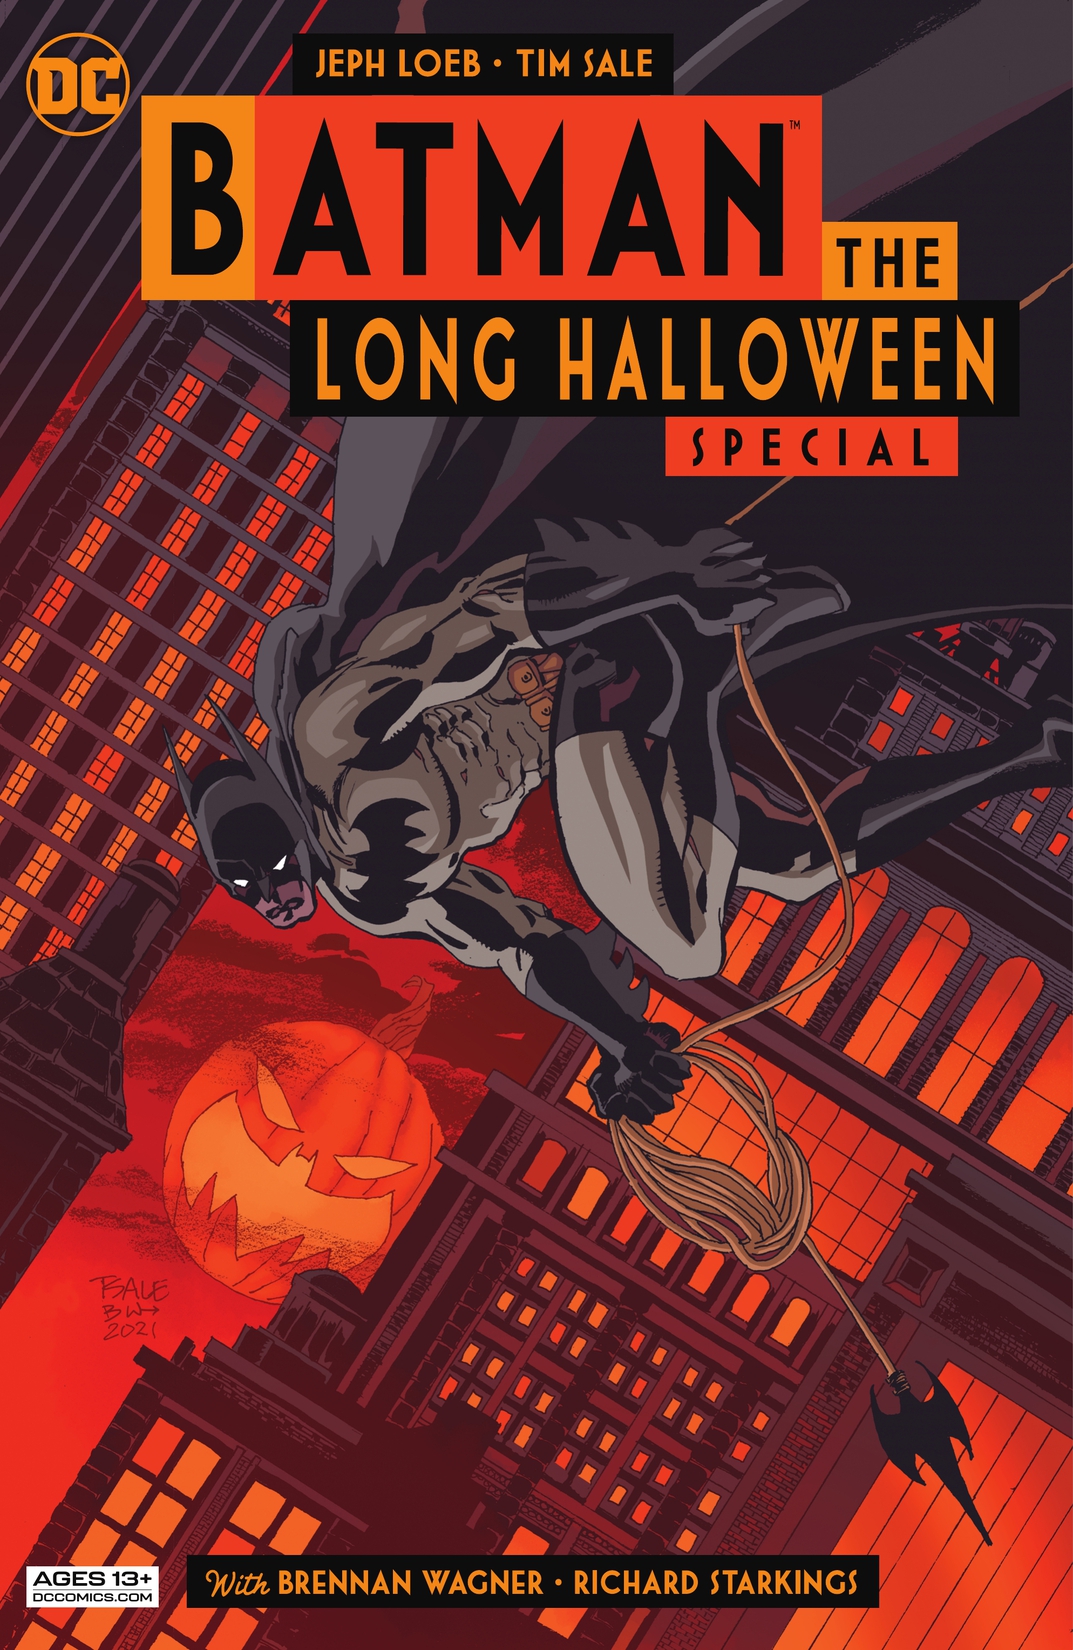 Batman: The Long Halloween Special #1 preview images